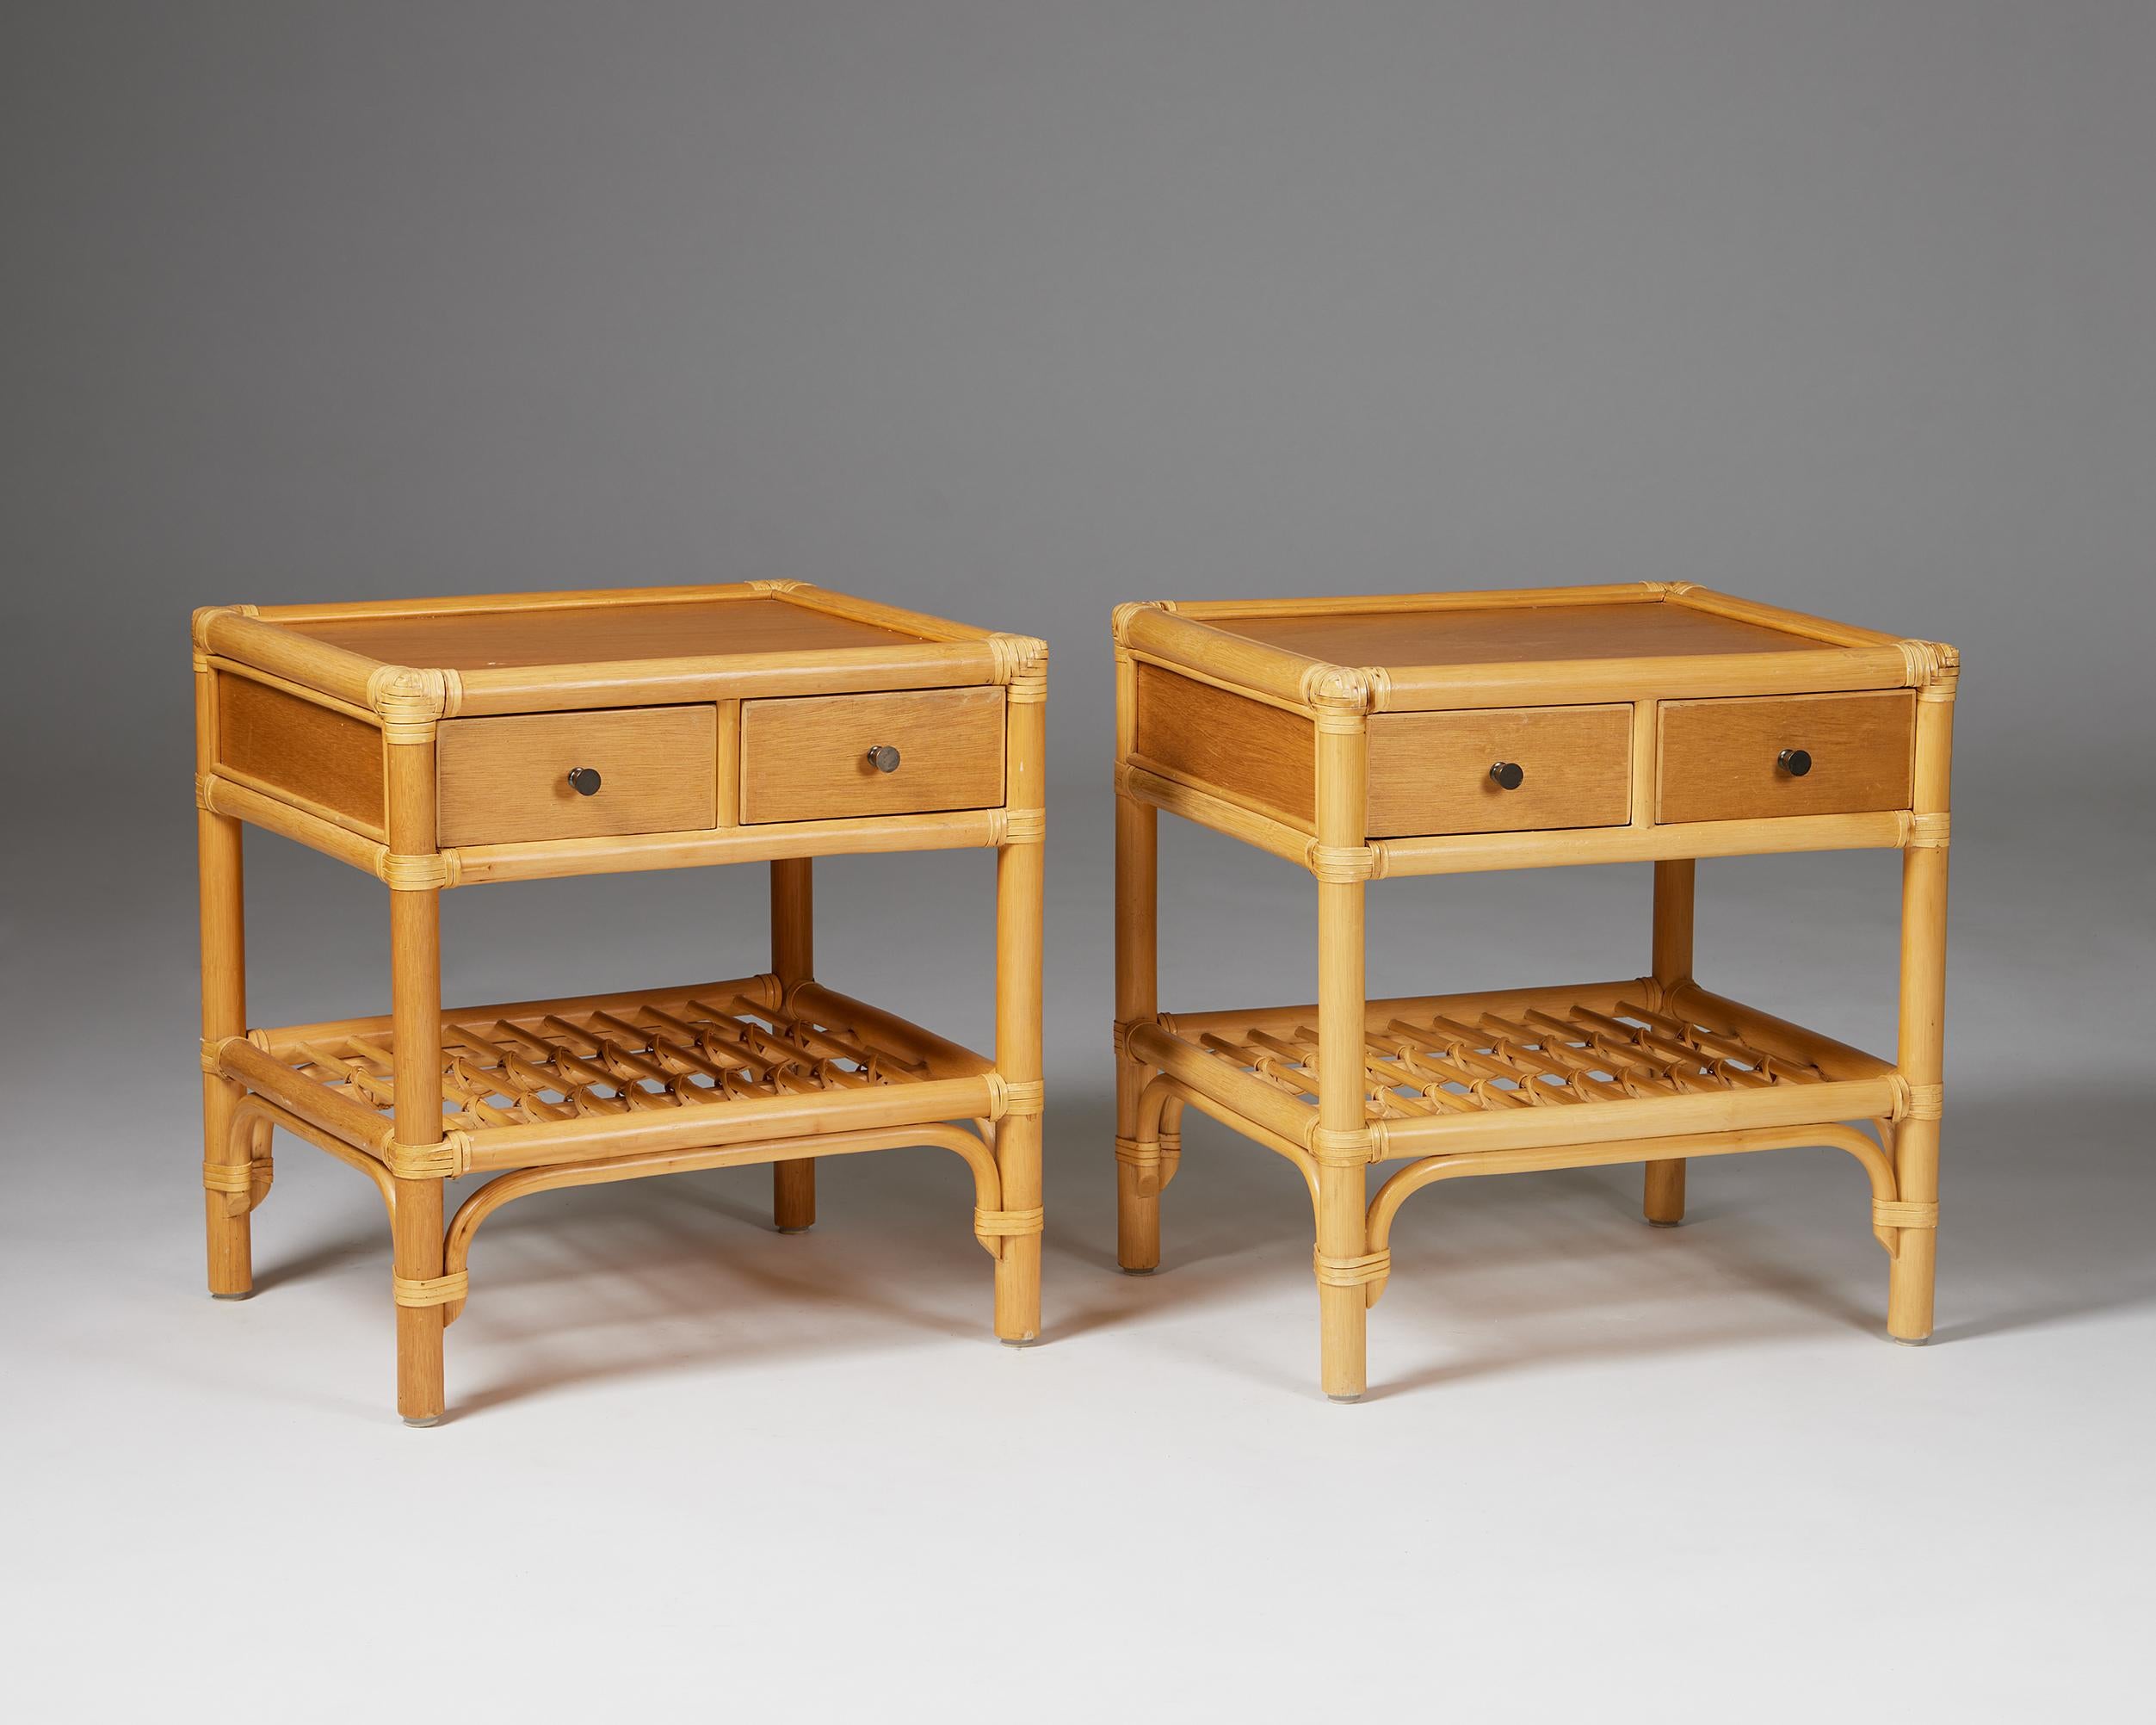 Pair of bedside tables, anonymous for DUX,
Sweden, 1960s.

Cane, rattan, teak and metal.

The colonial-style combination of cane, rattan, and teak makes this Scandinavian bedside table design particularly interesting. The woven edges and metal